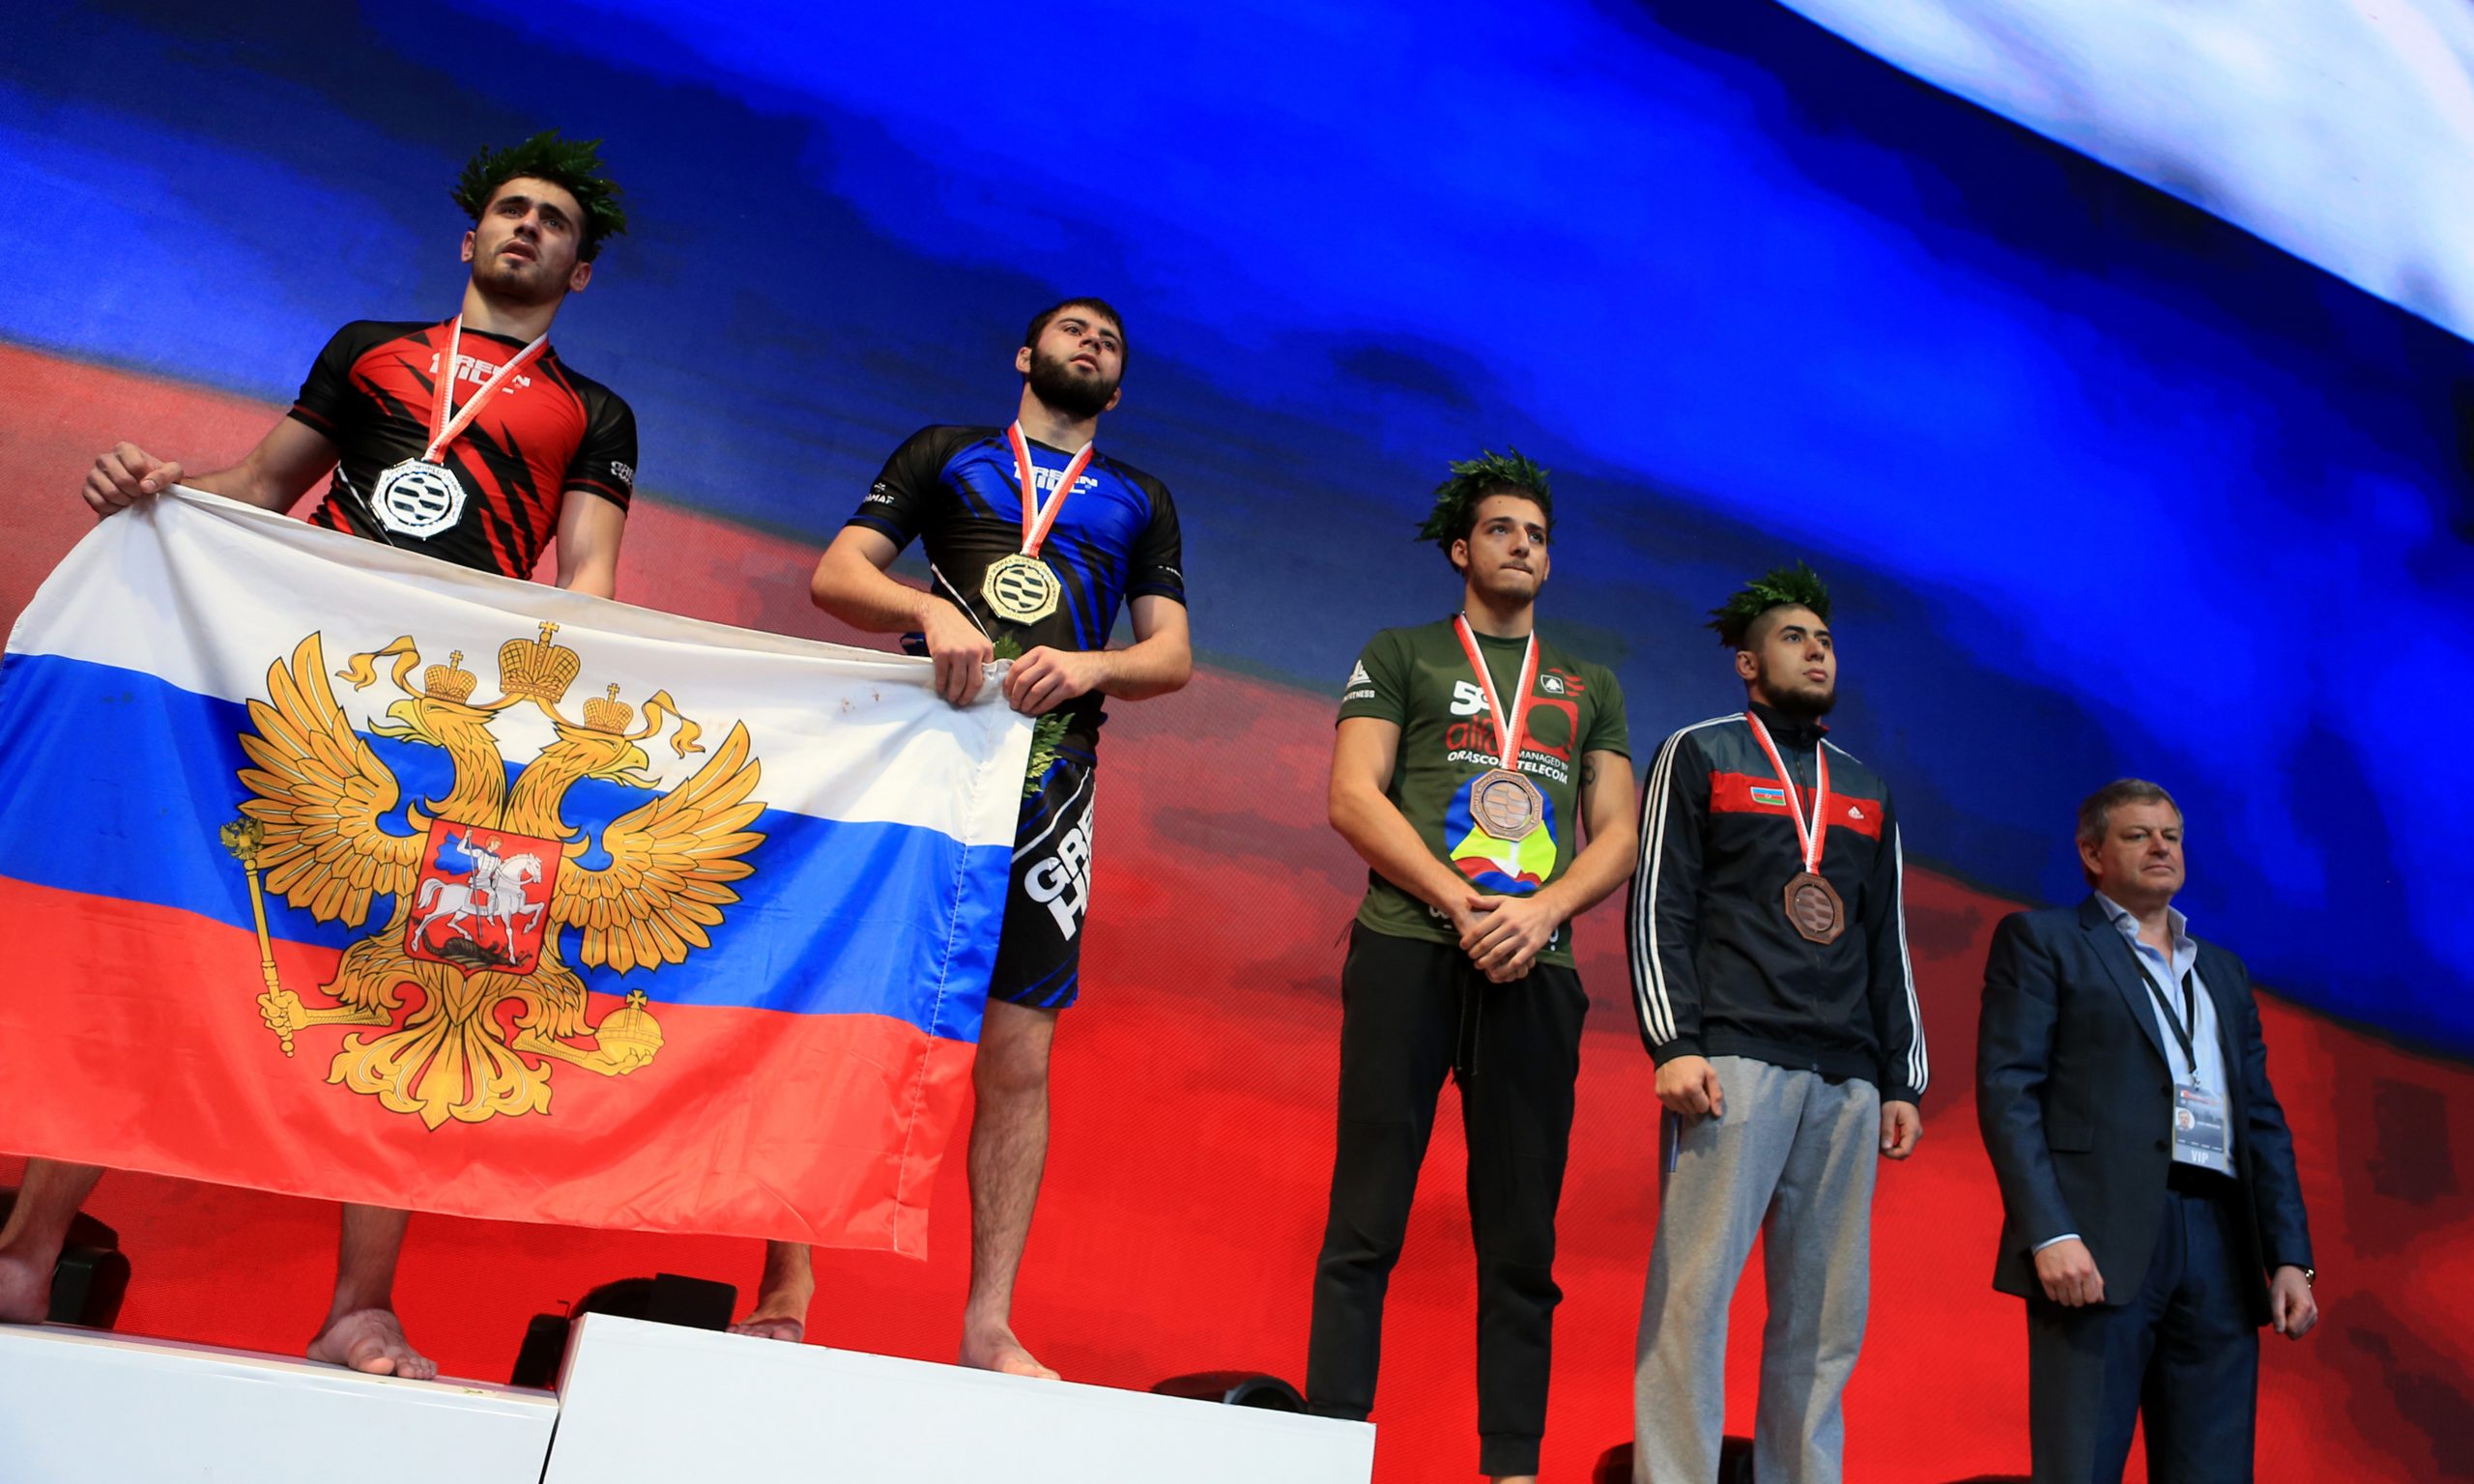 Russia Rules at 2018 Unified Amateur MMA World Championships